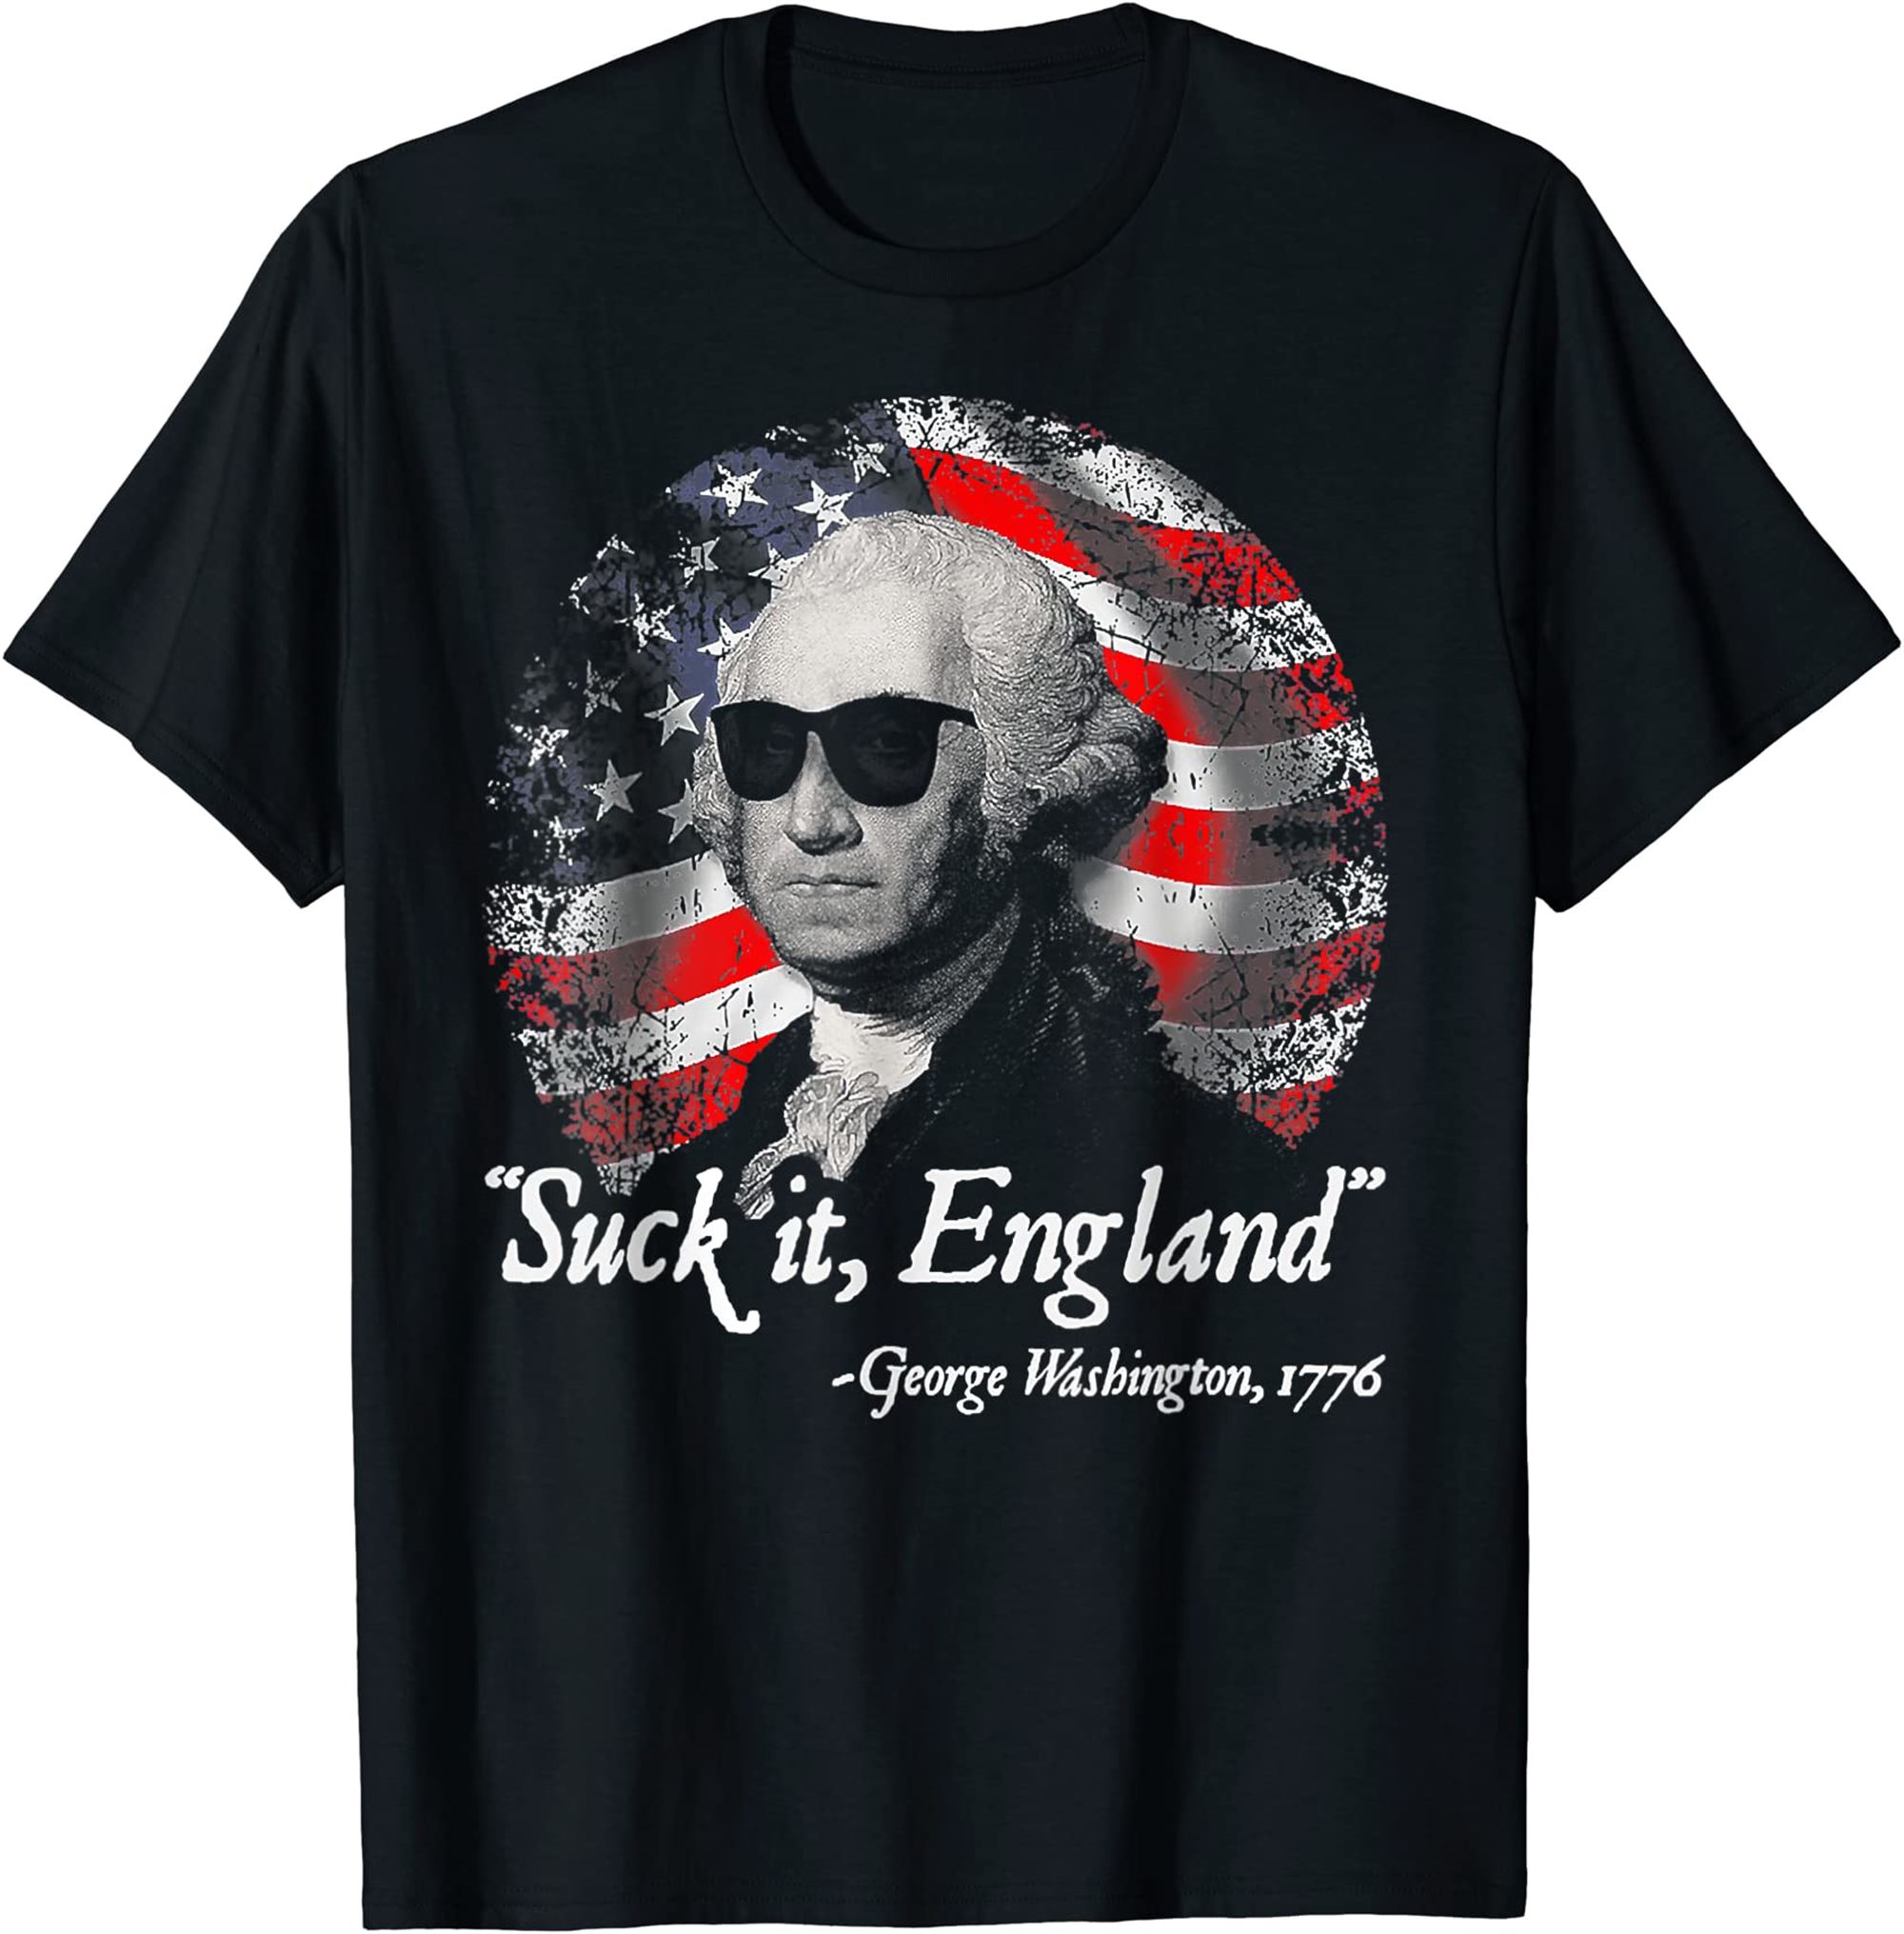 Suck It England Funny 4th Of July George Washington 1776 T-shirt Plus Size Up To 5xl